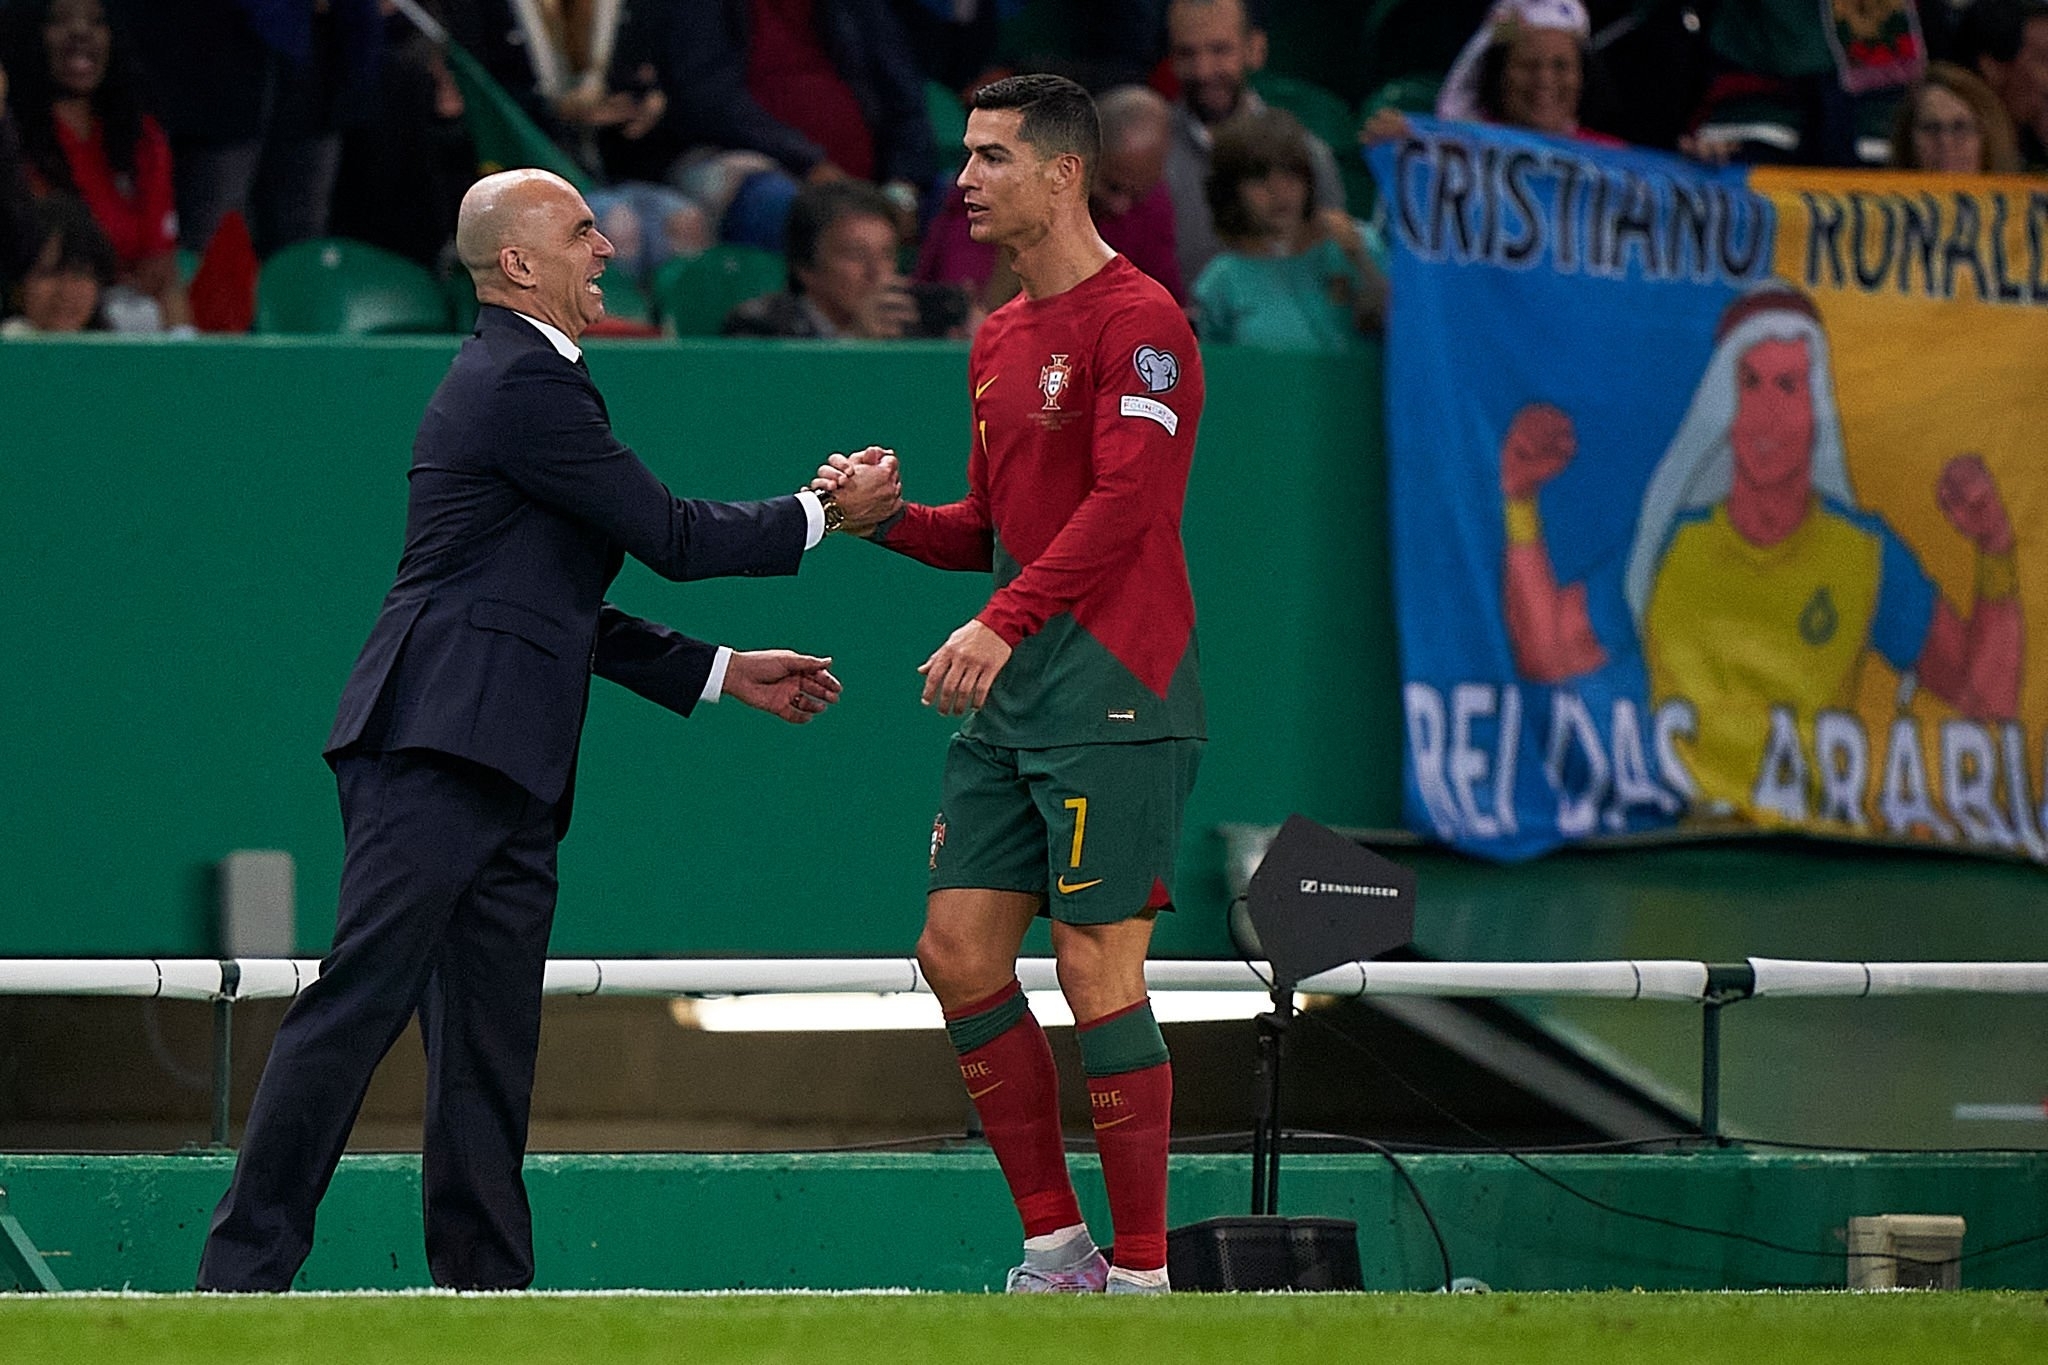 Portugal coach Roberto Martinez defends and starts Cristiano Ronaldo in Euro 2024 qualifiers even after Al-Nassr captain's poor performance